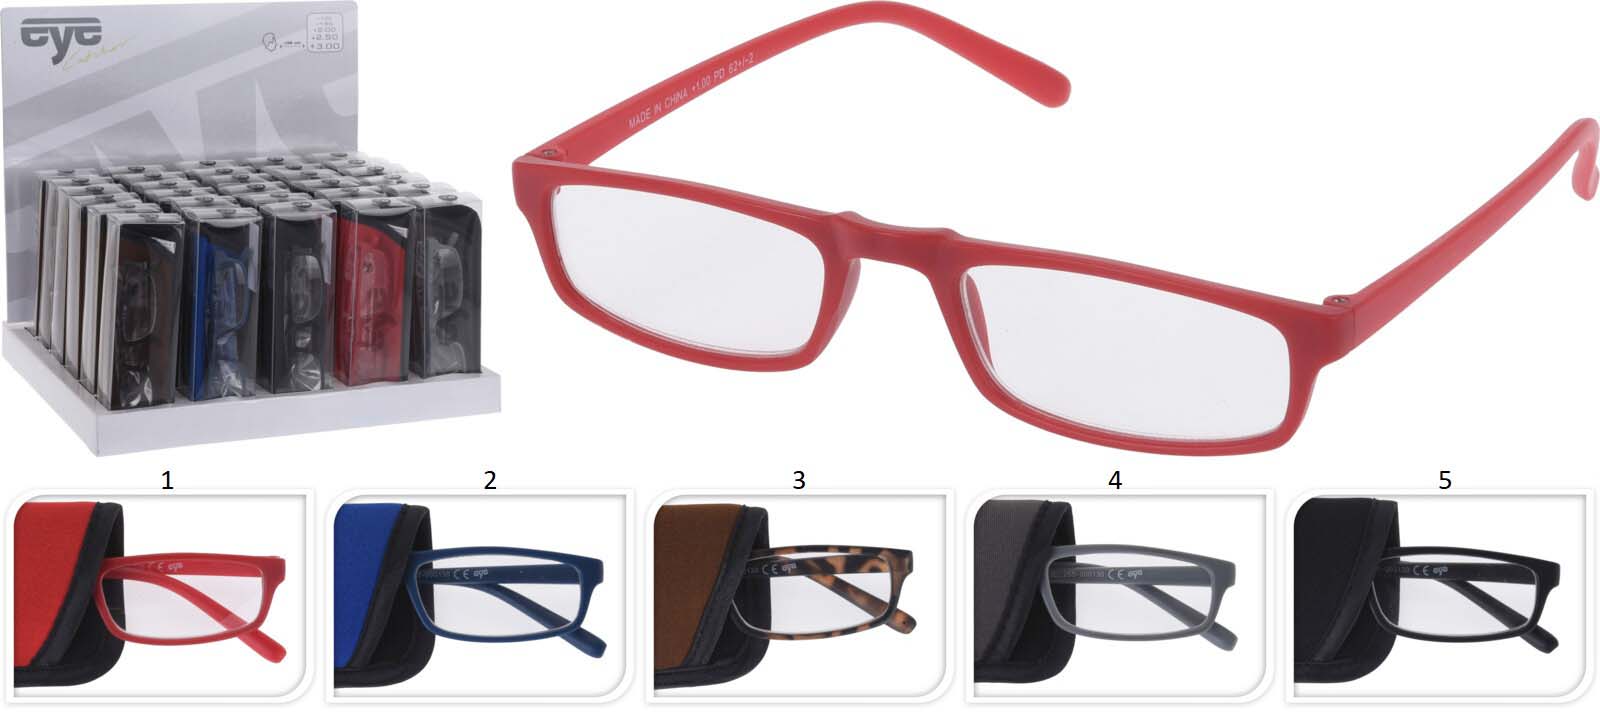 READING GLASSES IN POUCH 5 ASSORTED COLORS